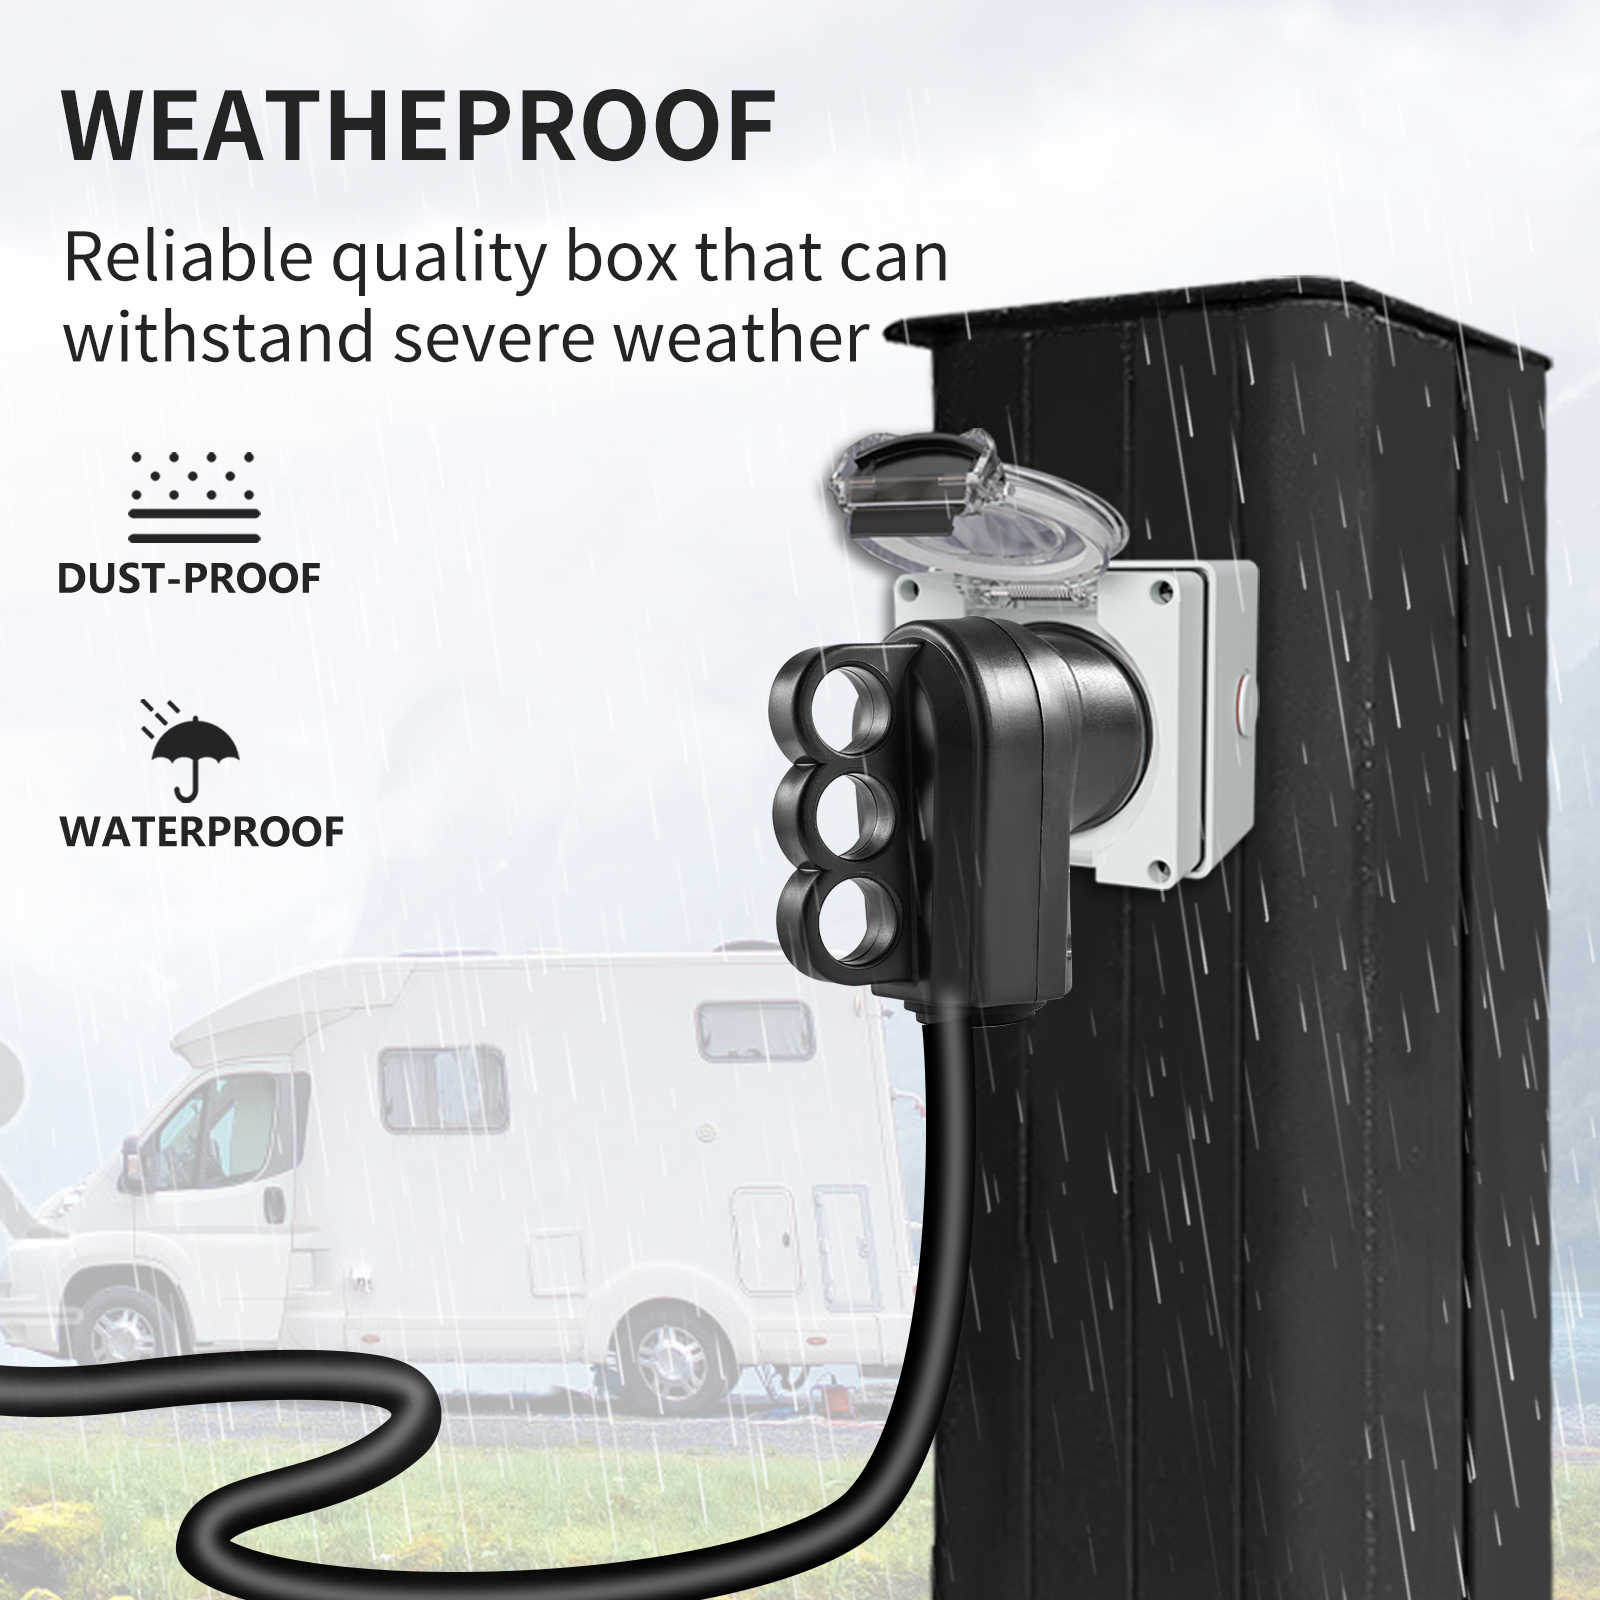 50A Weather-Resistant RV Outlet │ Legrand